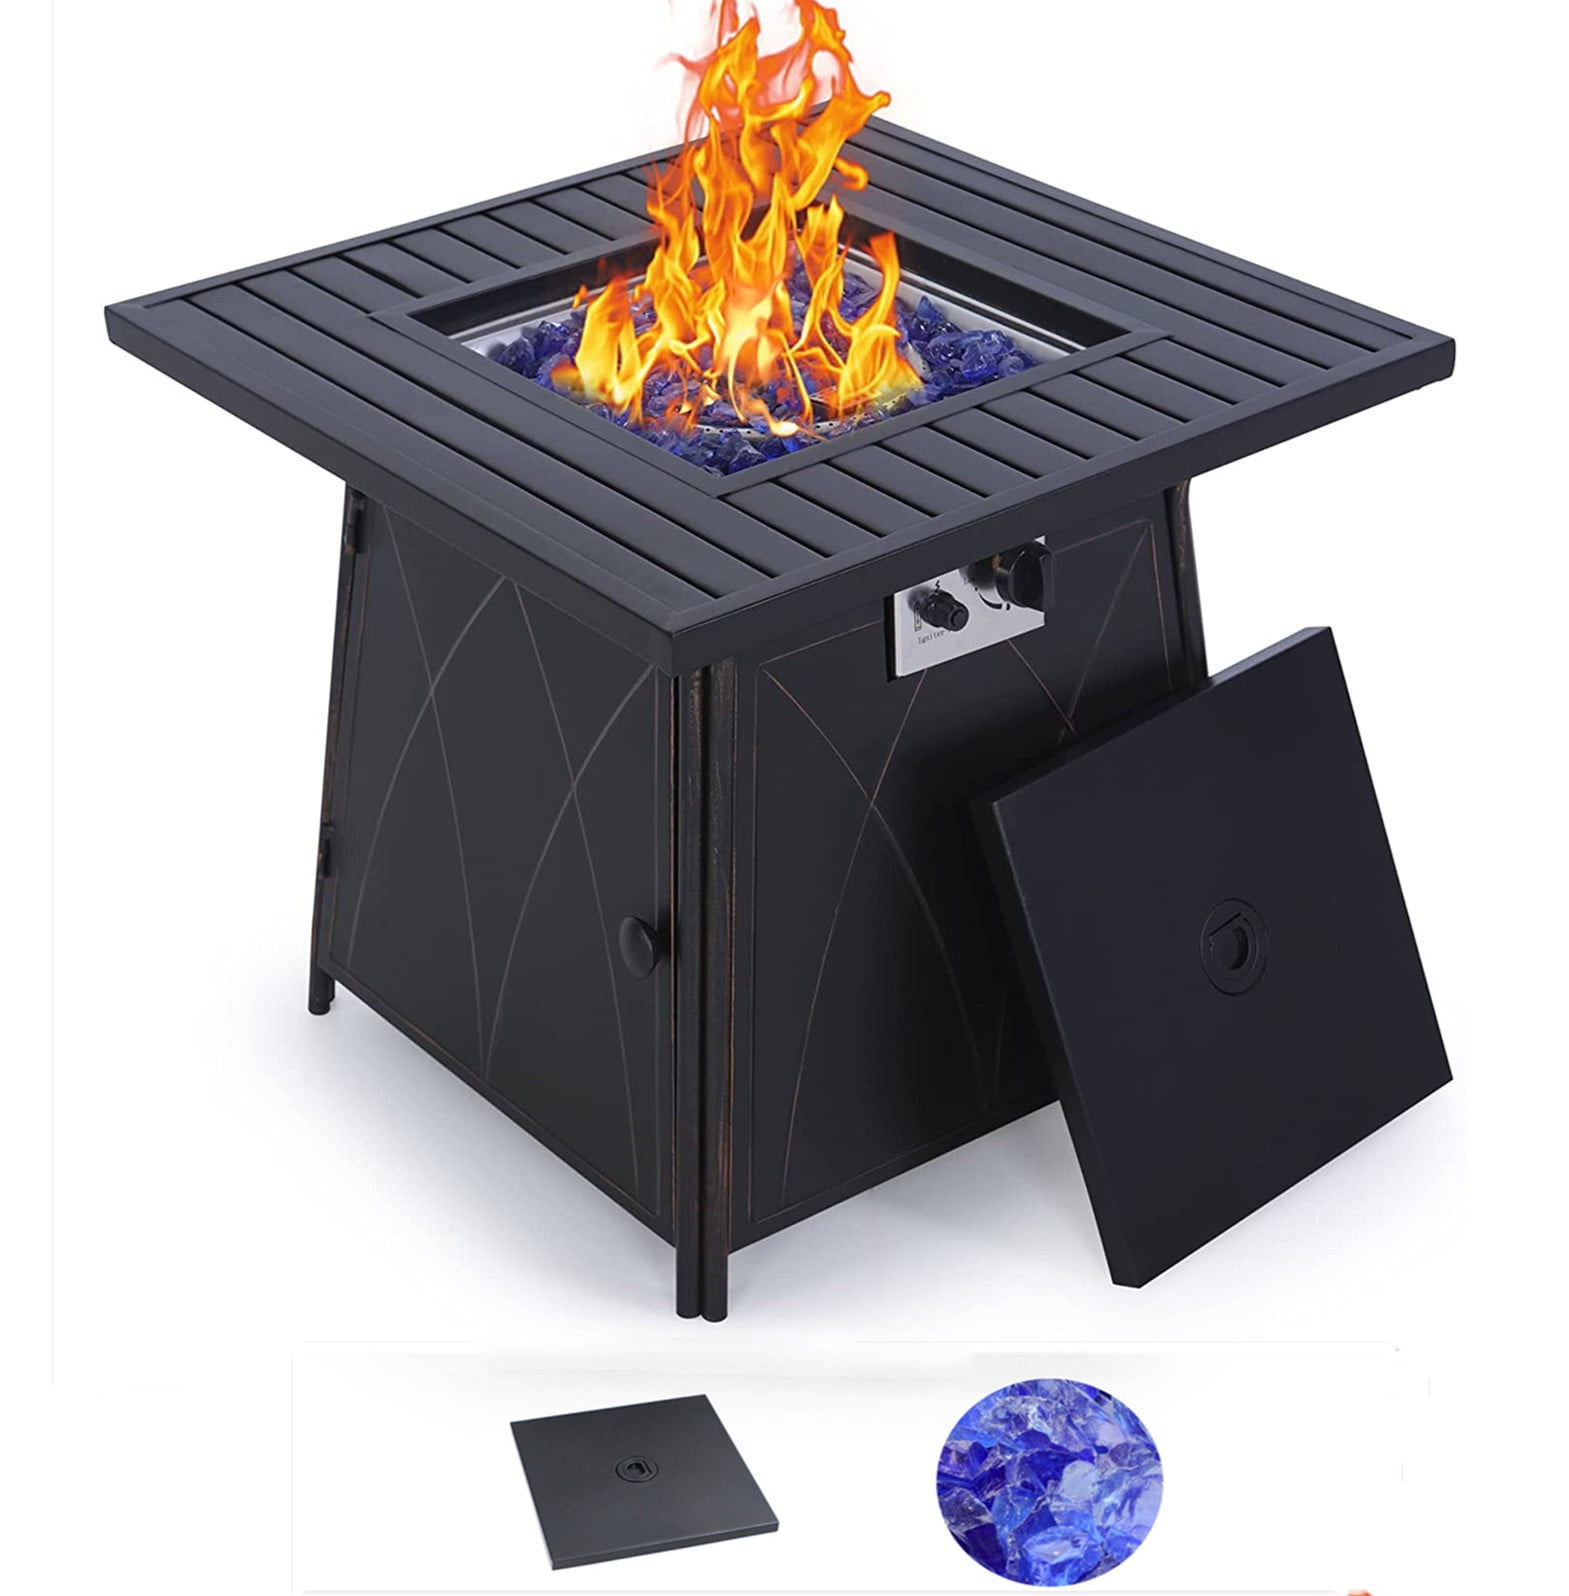 Mf Studio Gas Fire Pit Table 28 Inch, Are Gas Fire Pit Tables Any Good